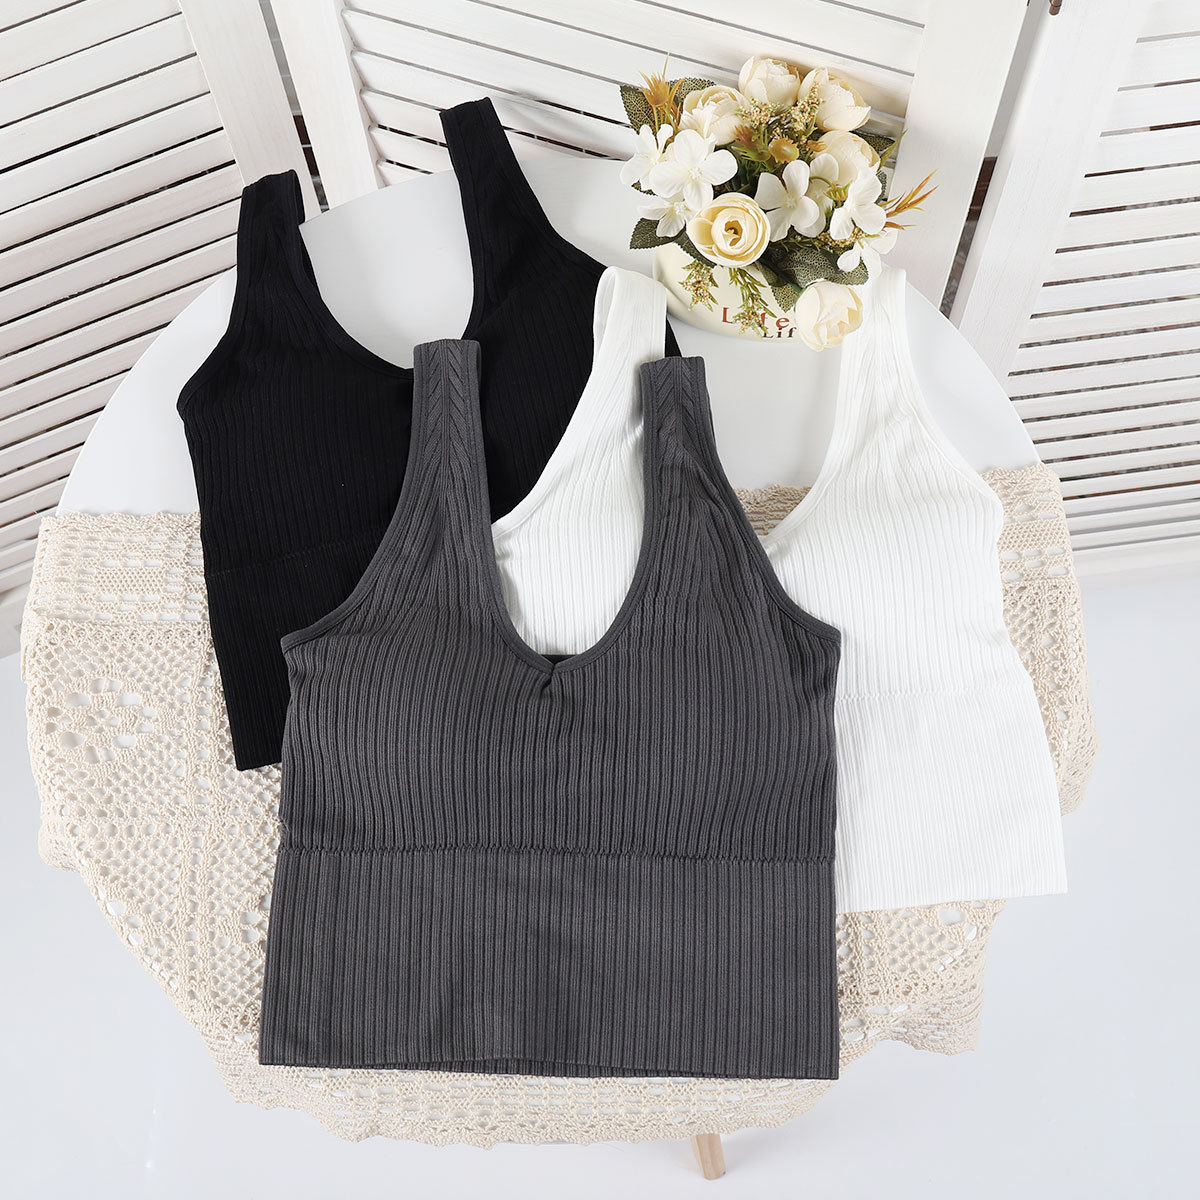 Autumn and winter 881# Hang Article Beautiful back seamless Wrap chest Sternum Korean Edition undergarment covering the chest and abdomen motion Primer vest source Manufactor